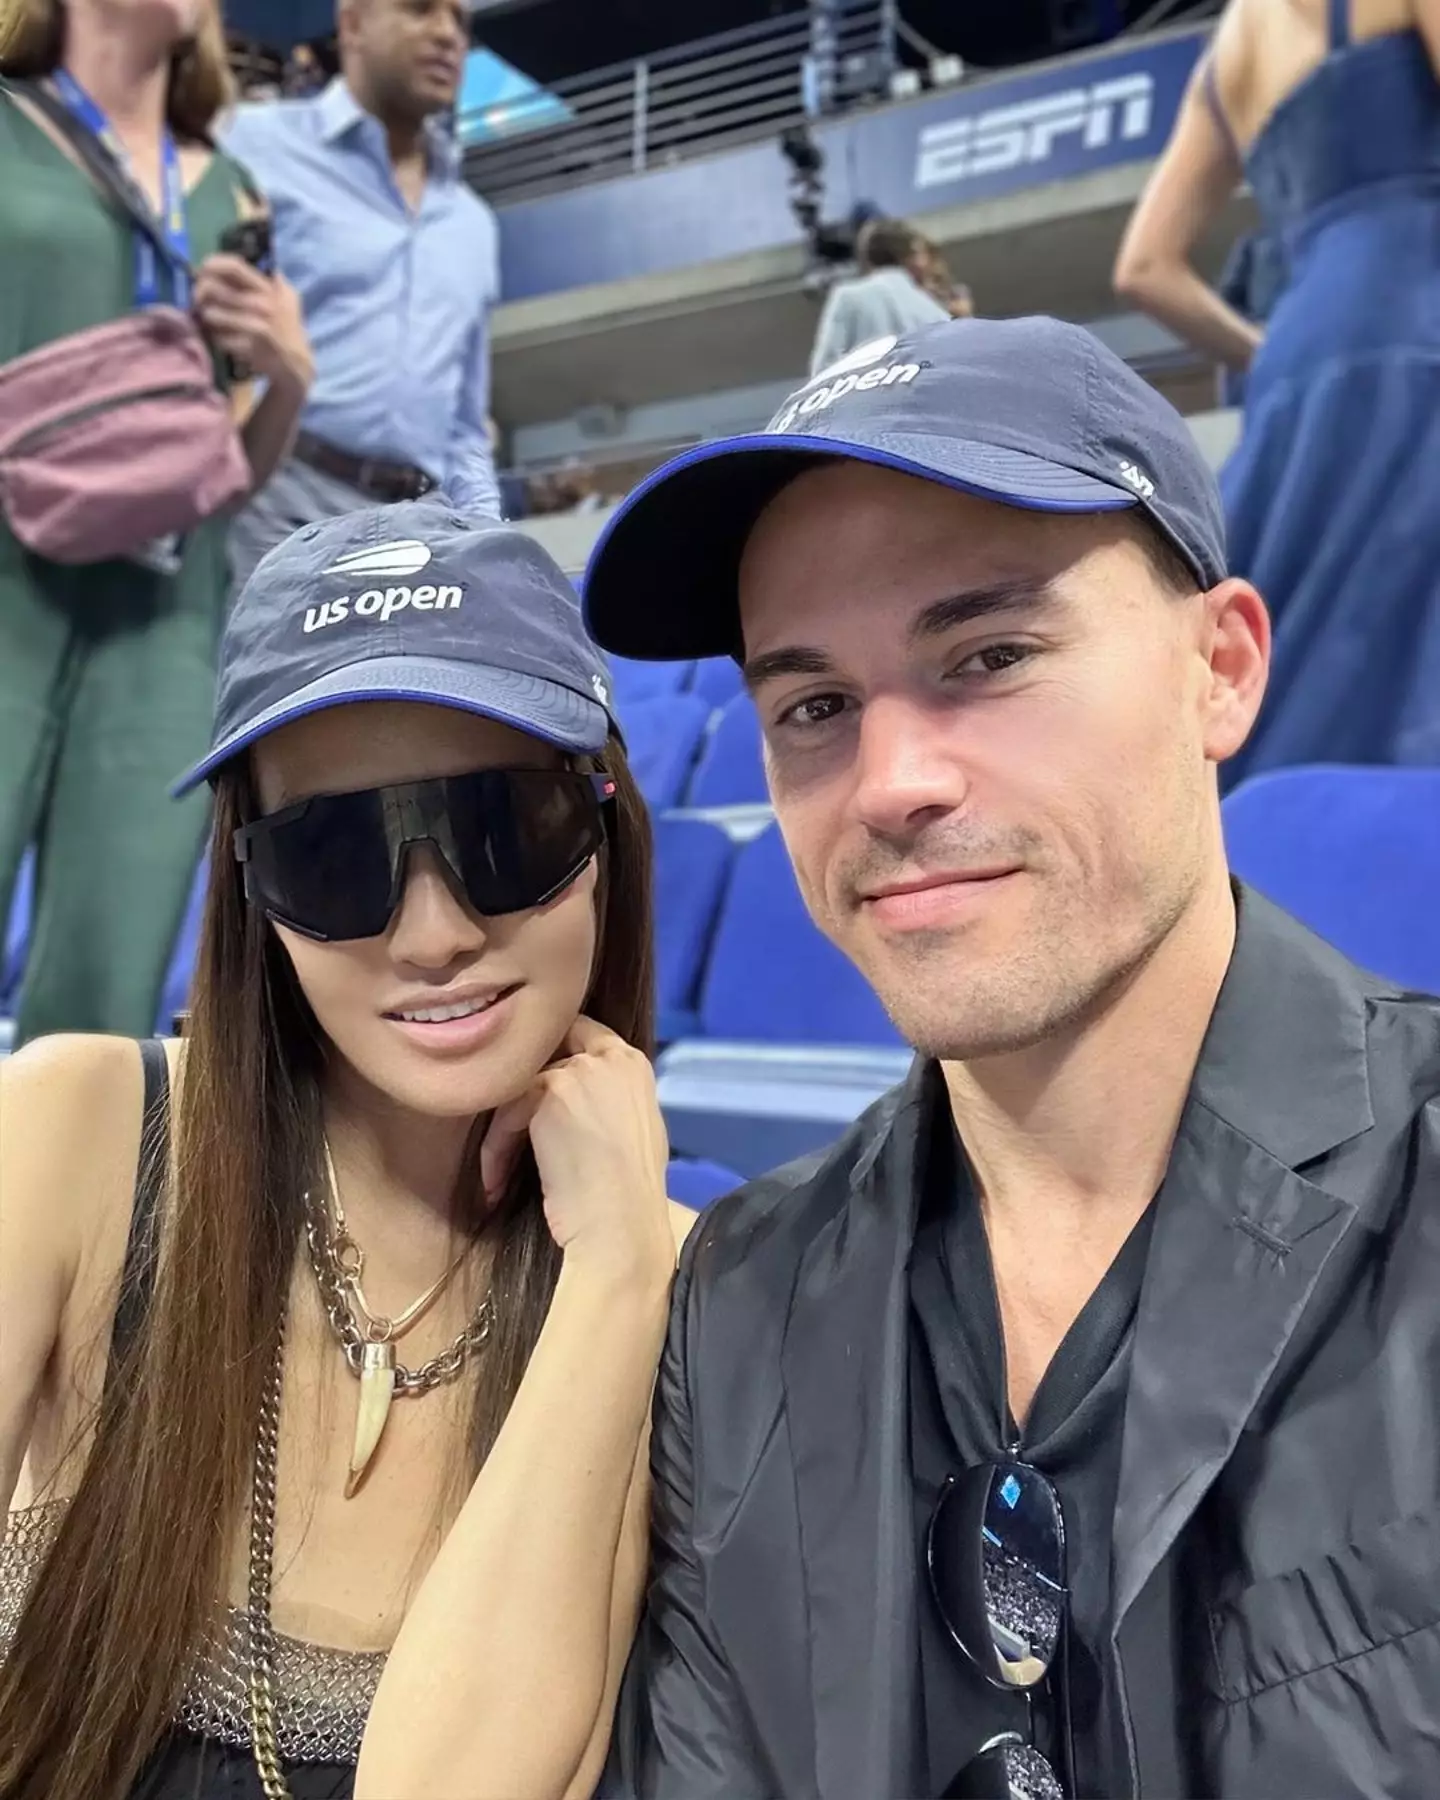 She posted snaps from the US Open this past weekend to Instagram.